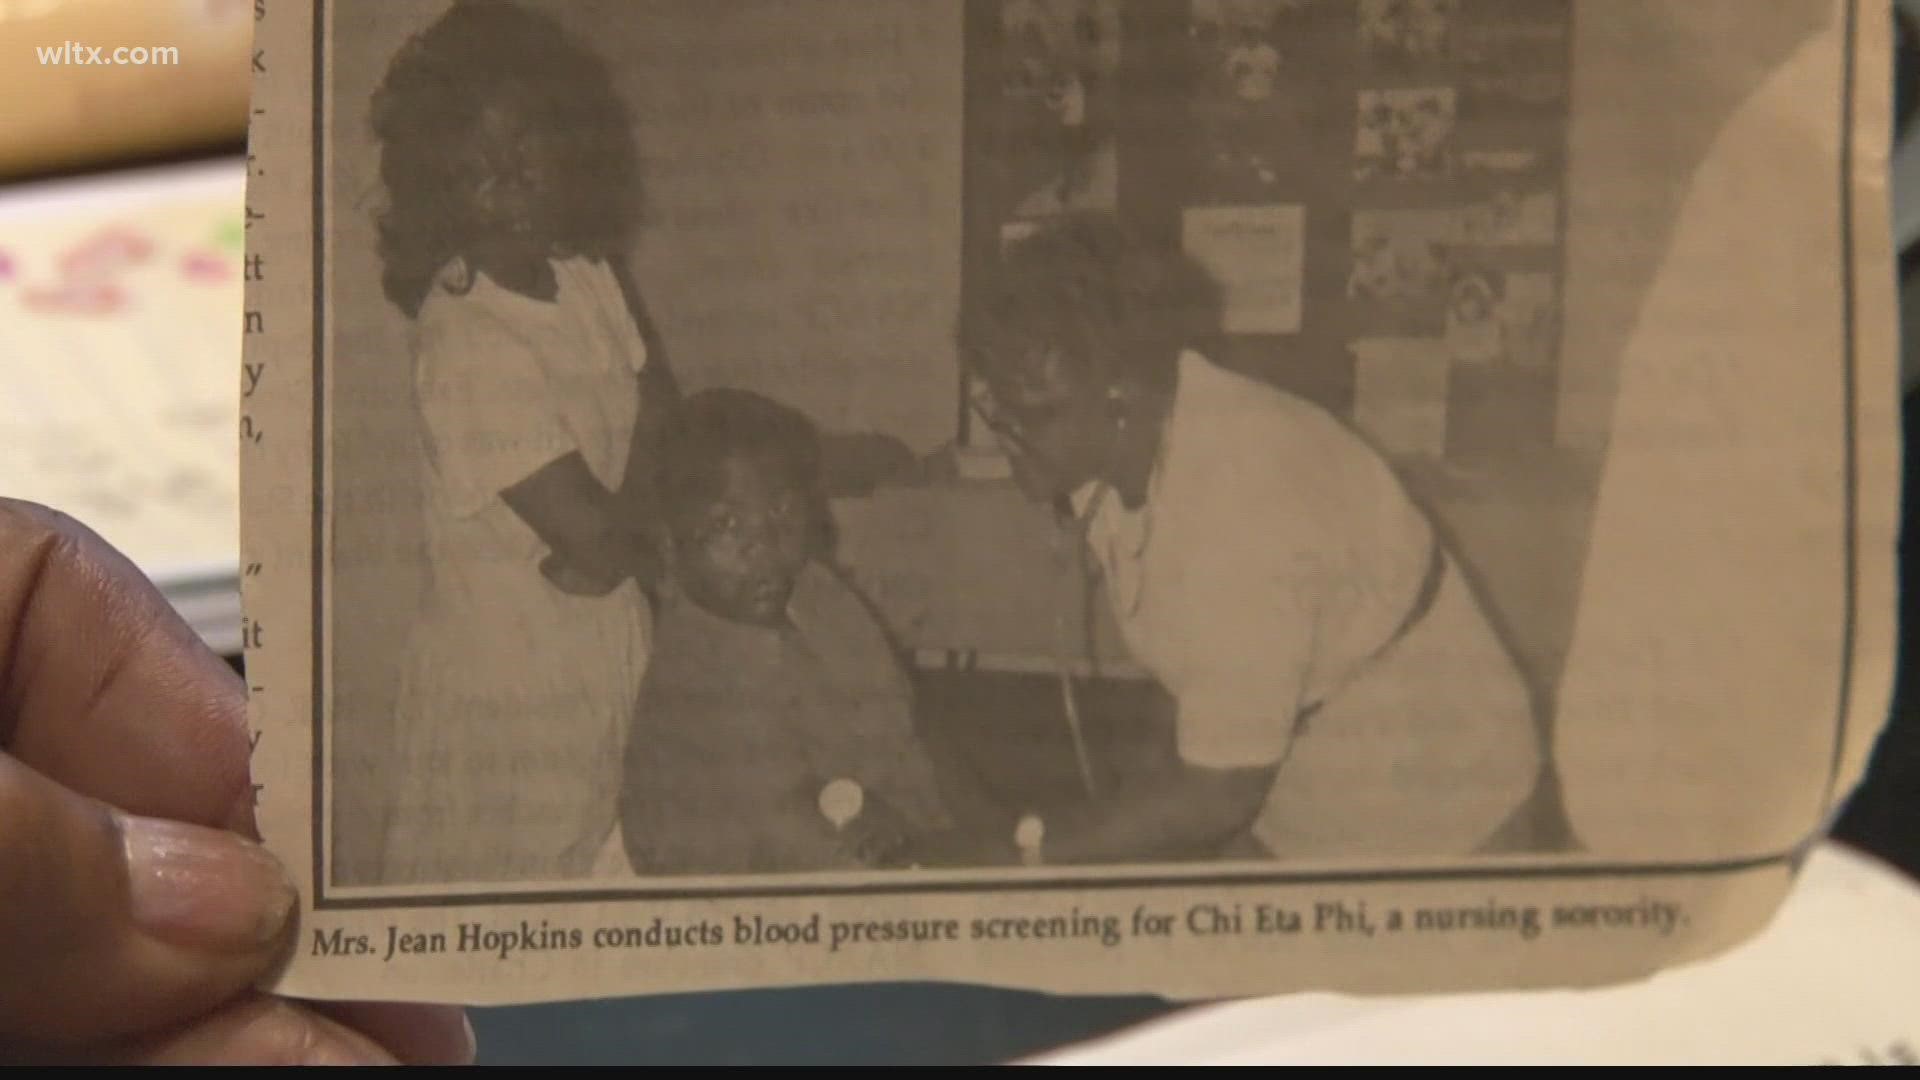 Some local groups are hopeful that preserving that preserving Black medical history will offer answers to current health disparities.